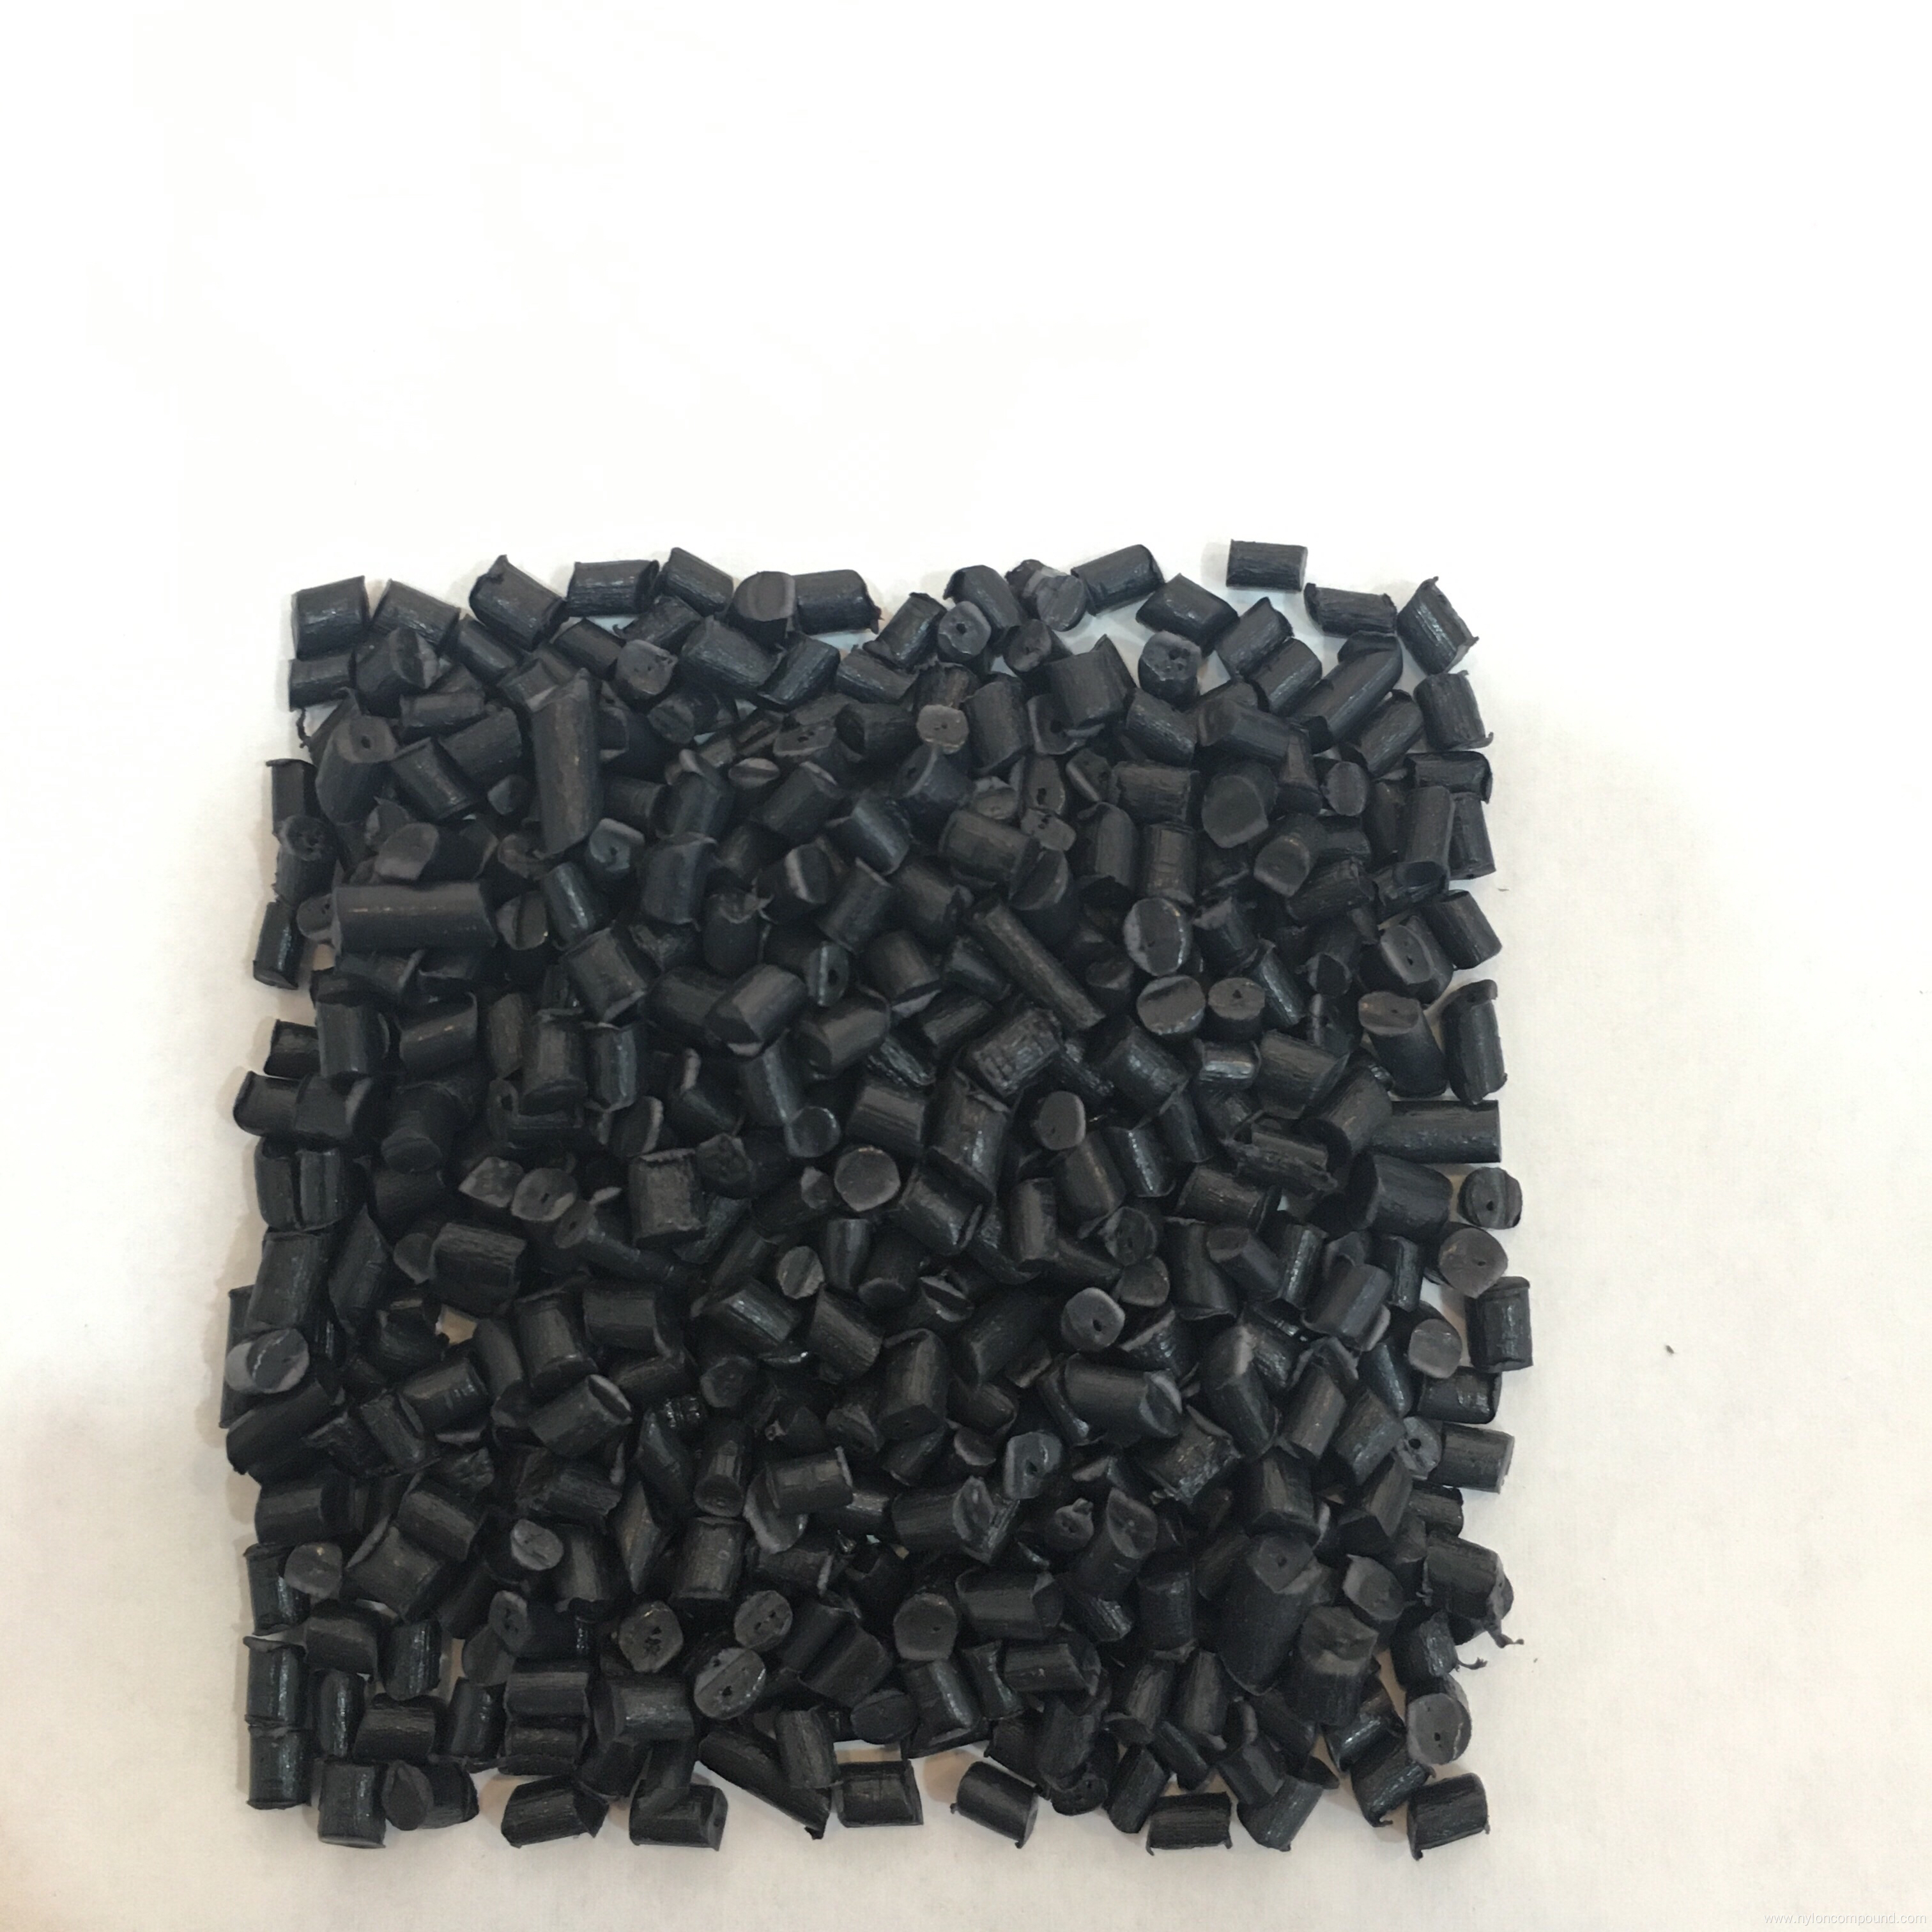 PA66 pellet with 40GF/FV for Thermal profile